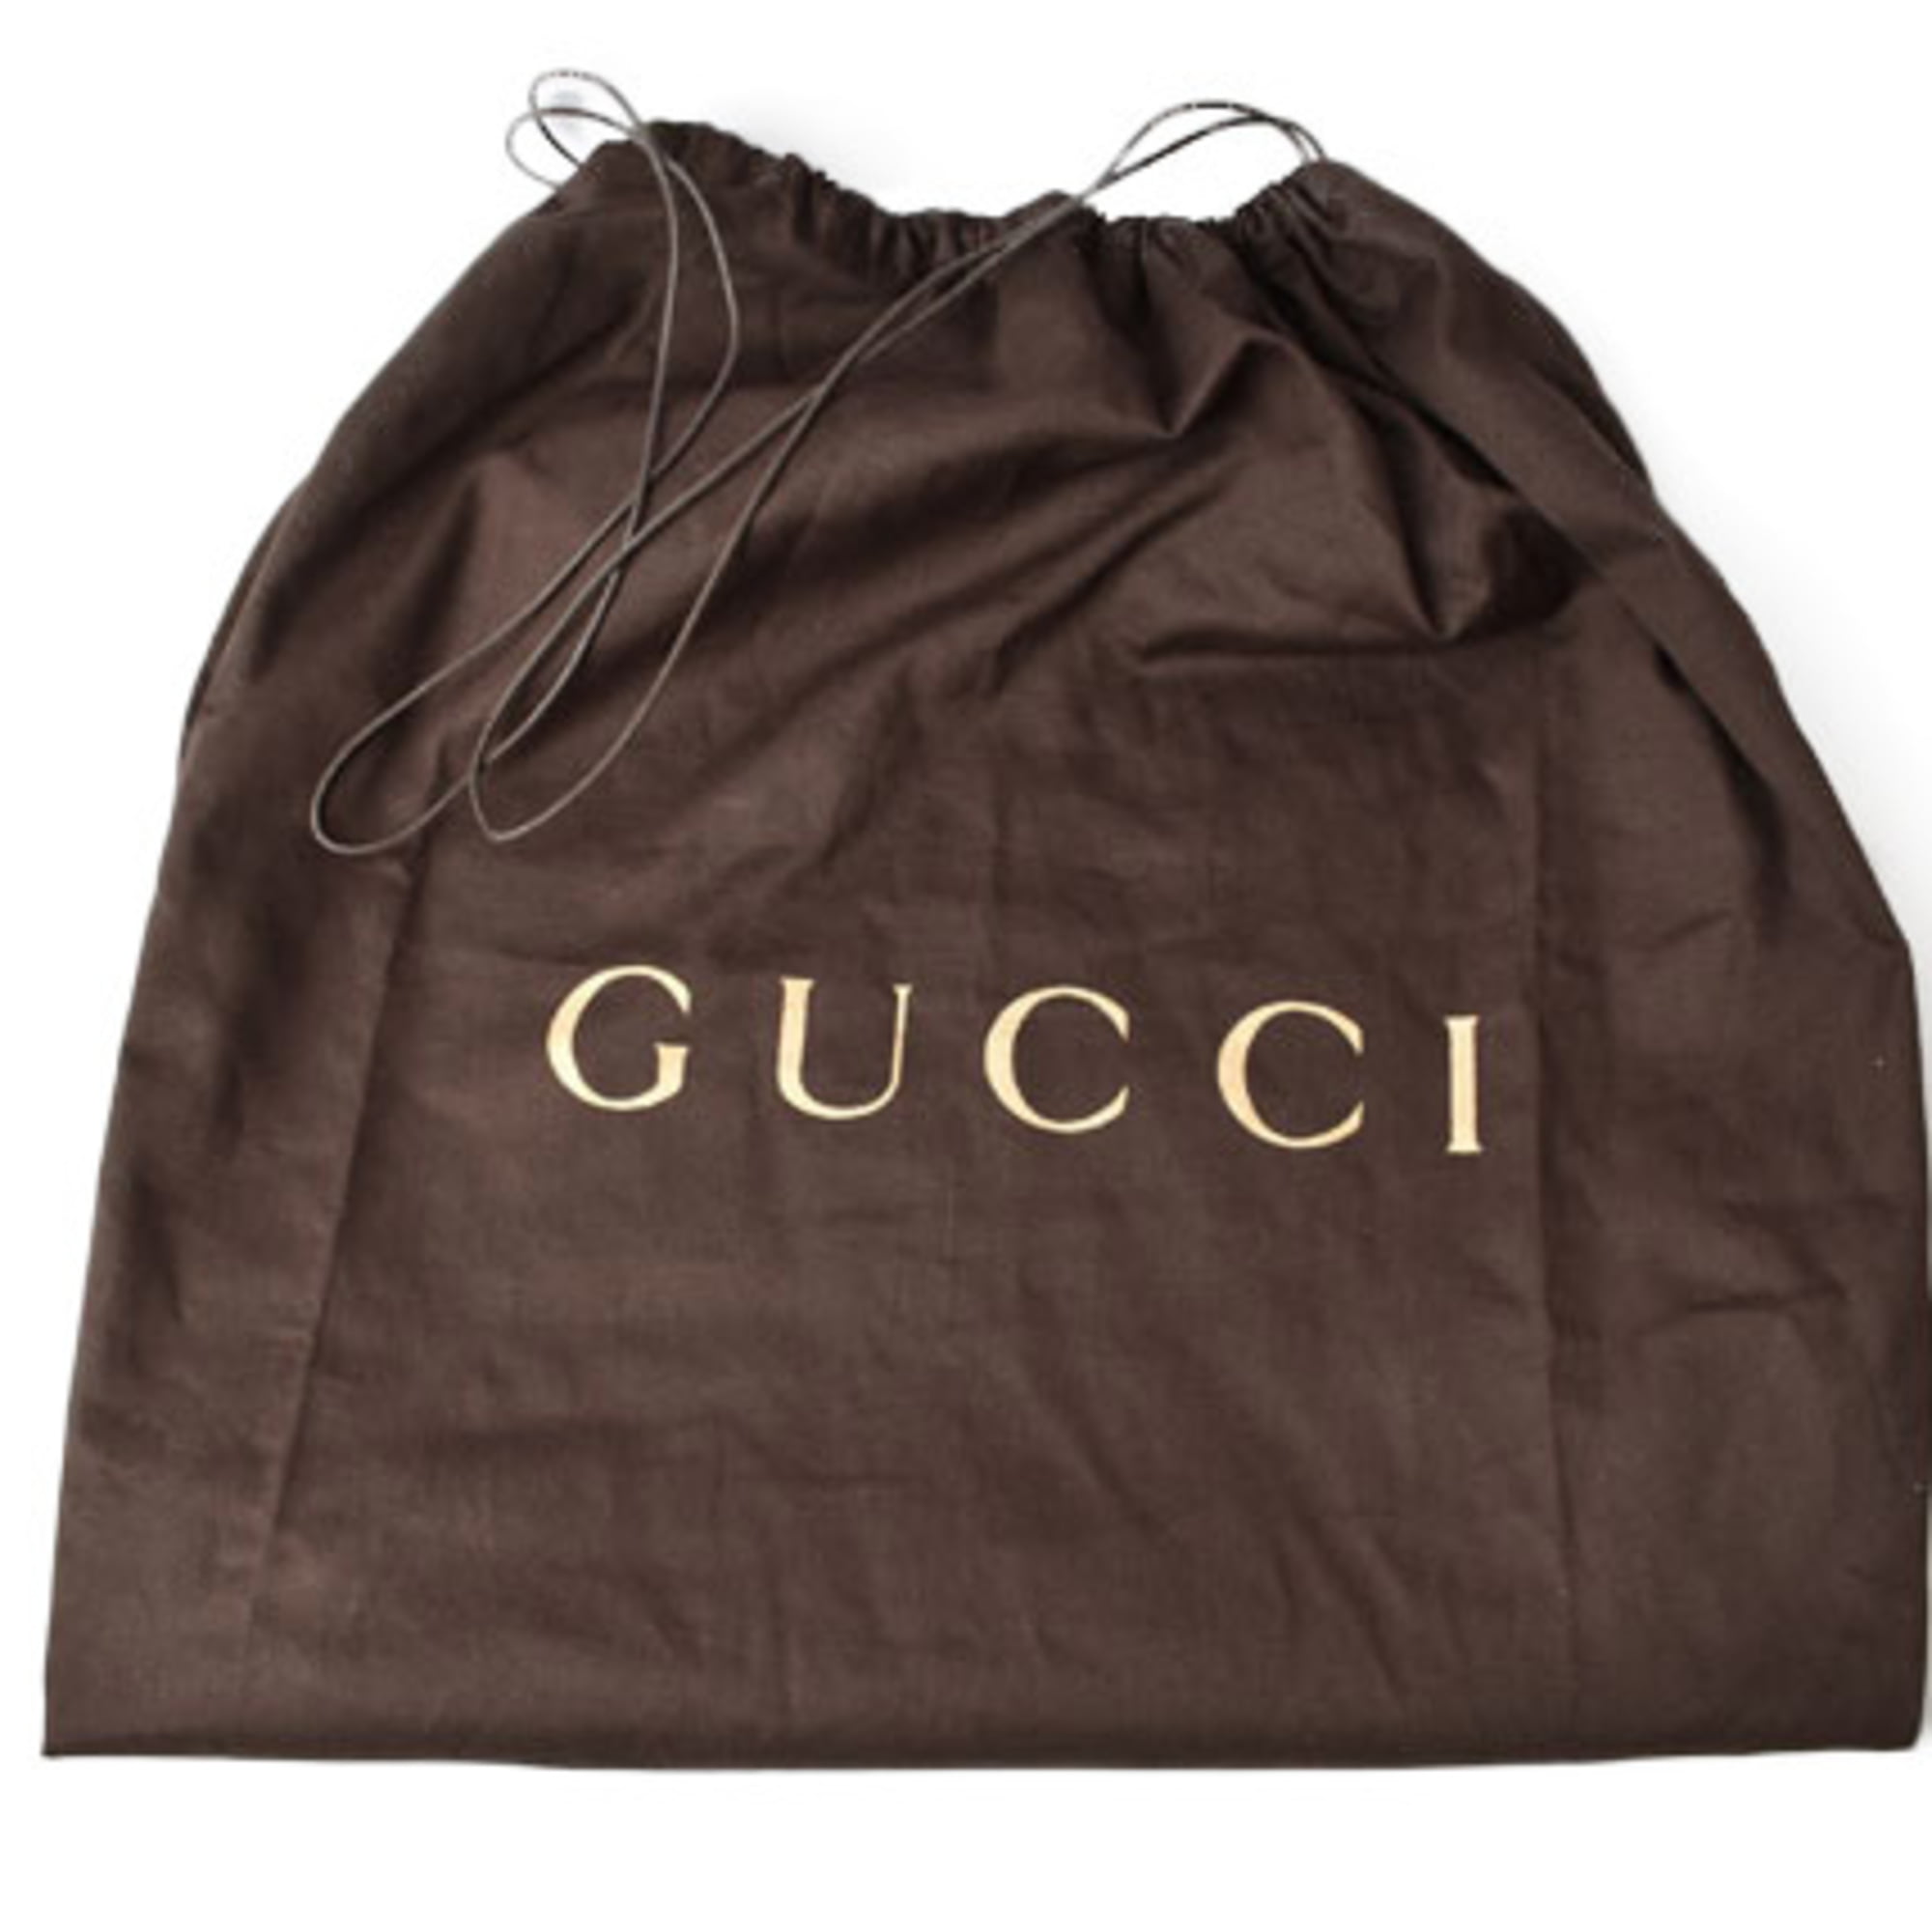 Pre-Owned Gucci Waist Pouch Body Bag GUCCI Backpack Belt LA Angel 